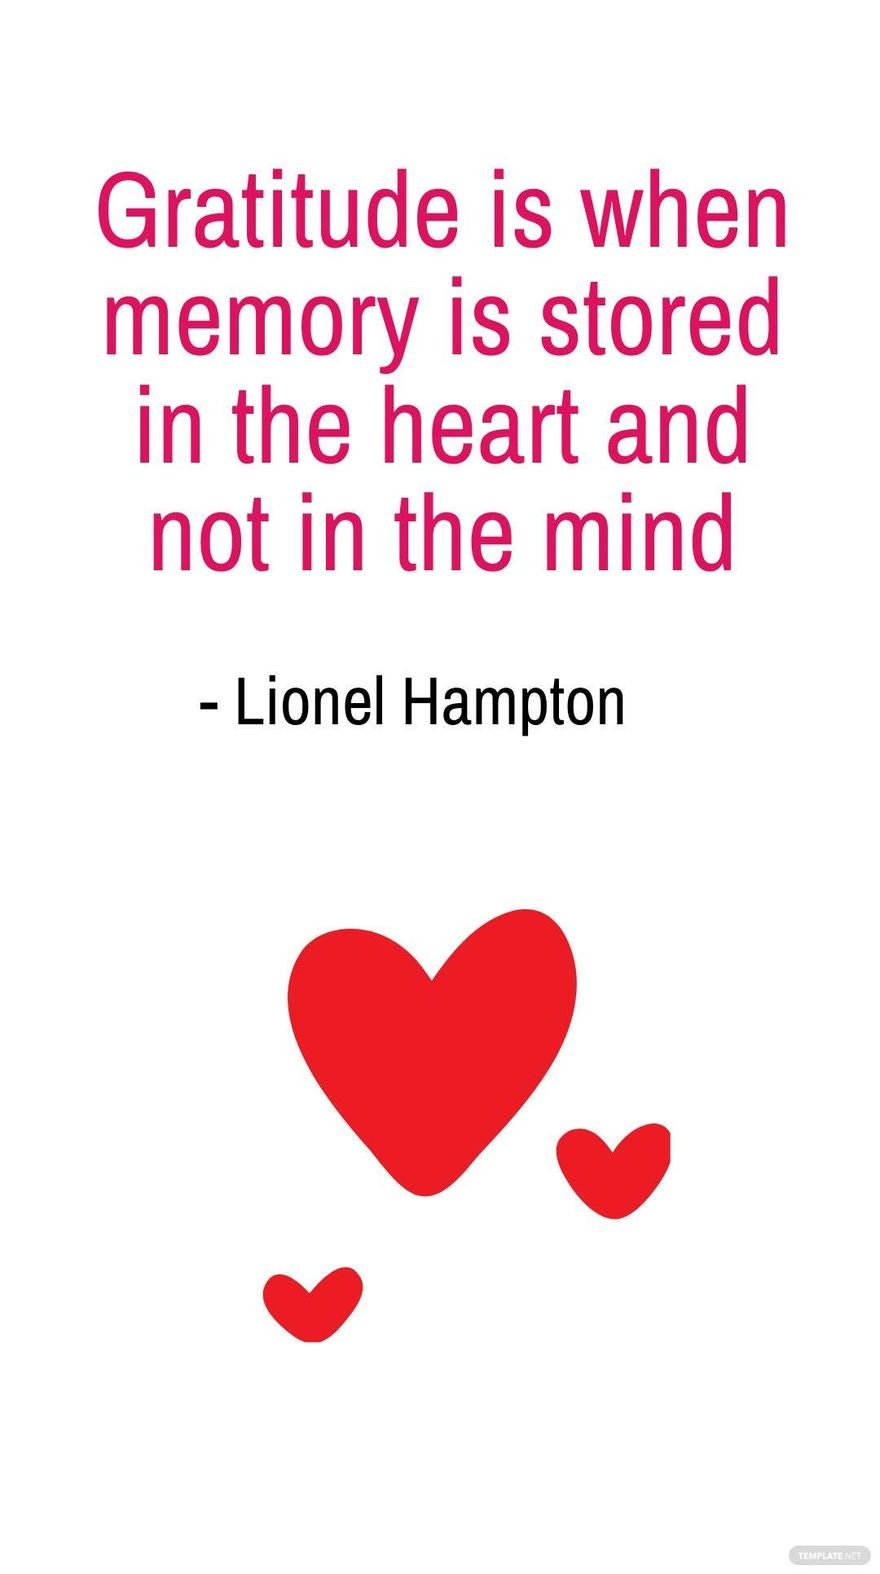 Free Lionel Hampton - Gratitude is when memory is stored in the heart and not in the mind in JPG